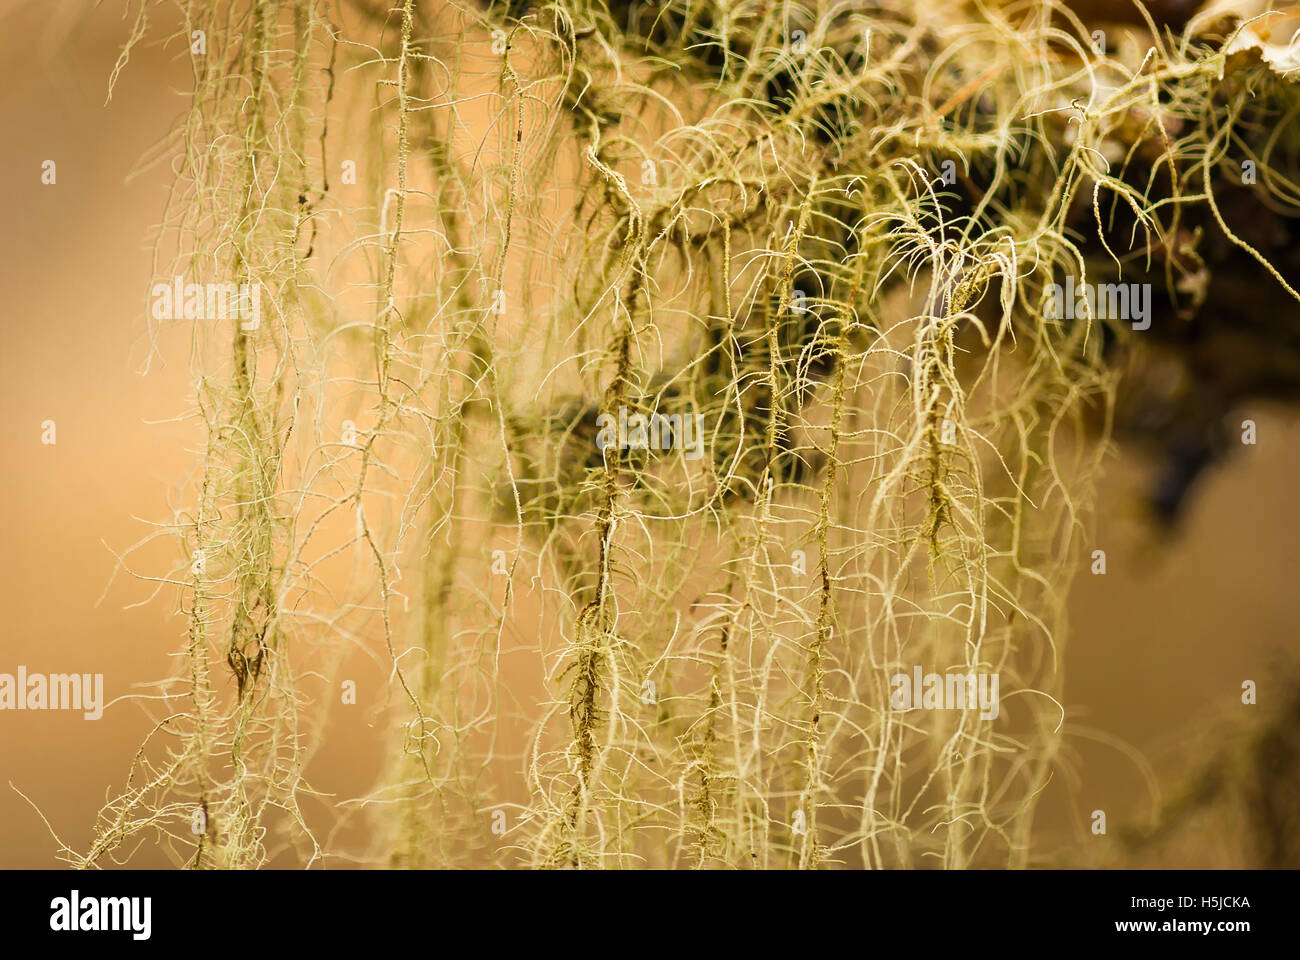 A macro landscape image of lichen, Usnea, hanging off a tree branch. Stock Photo